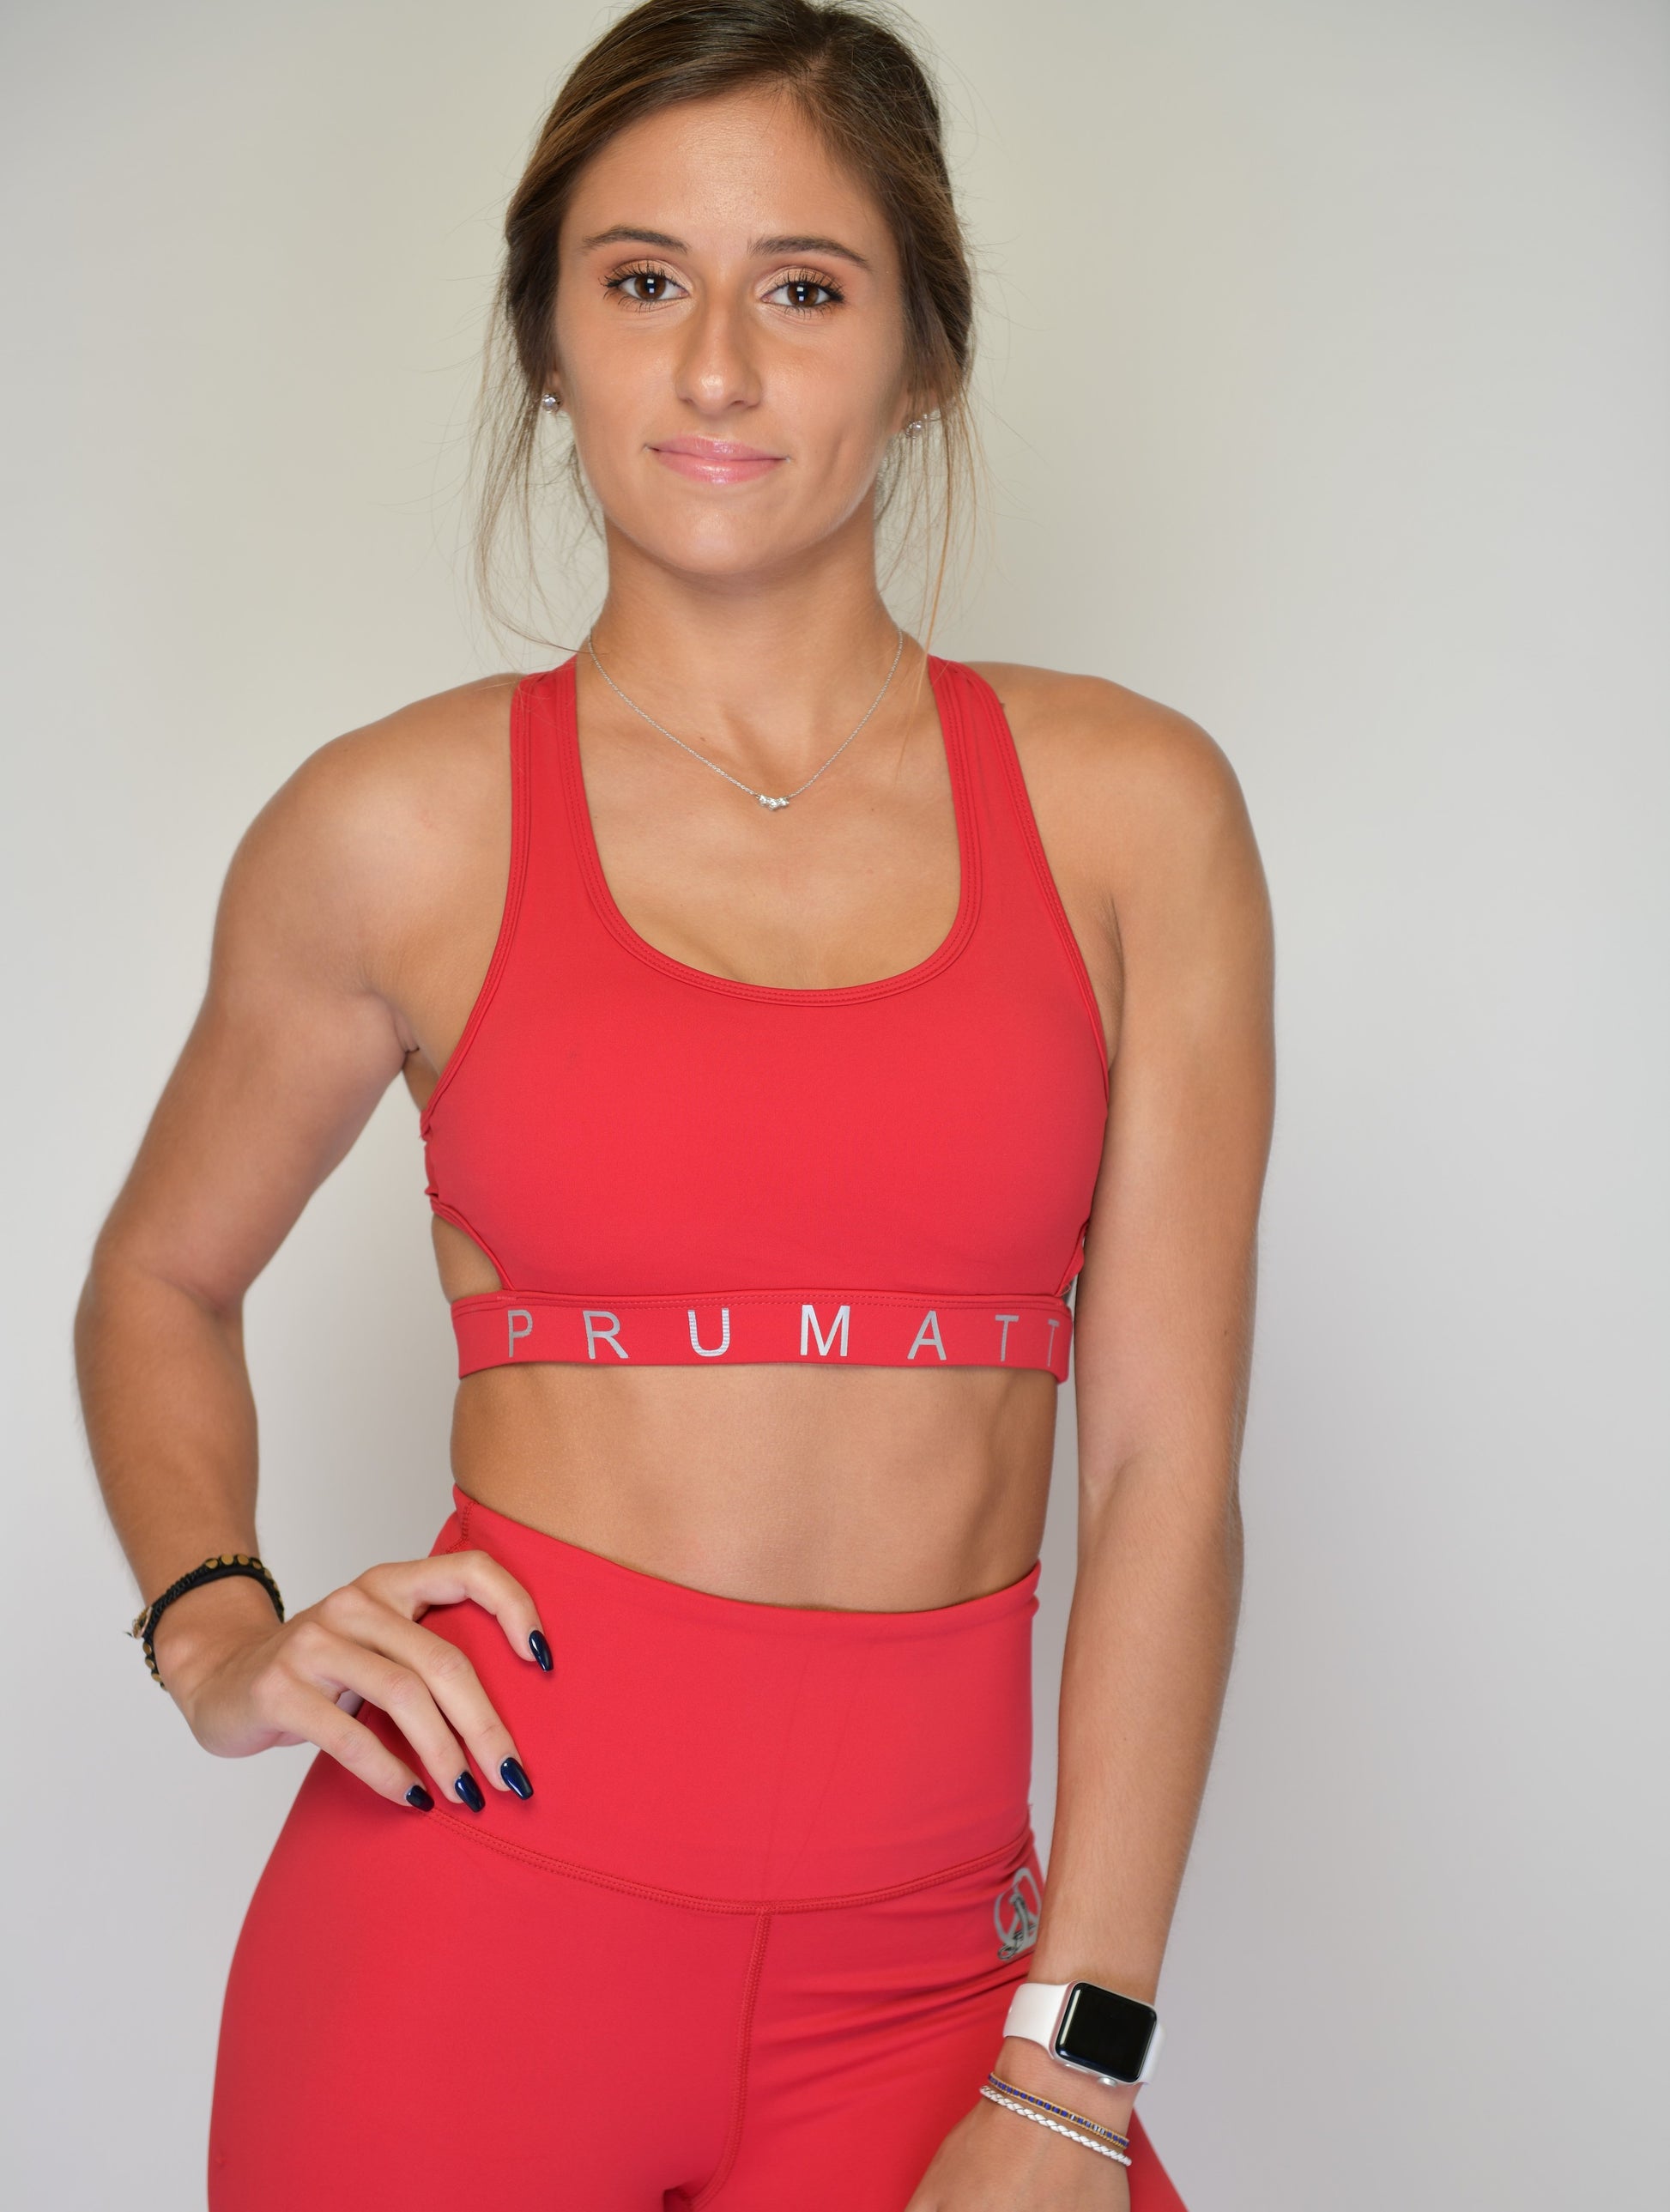 Santa's Simple Outfit Red Sports Bra  Simple outfits, Sports bra, Red sports  bra